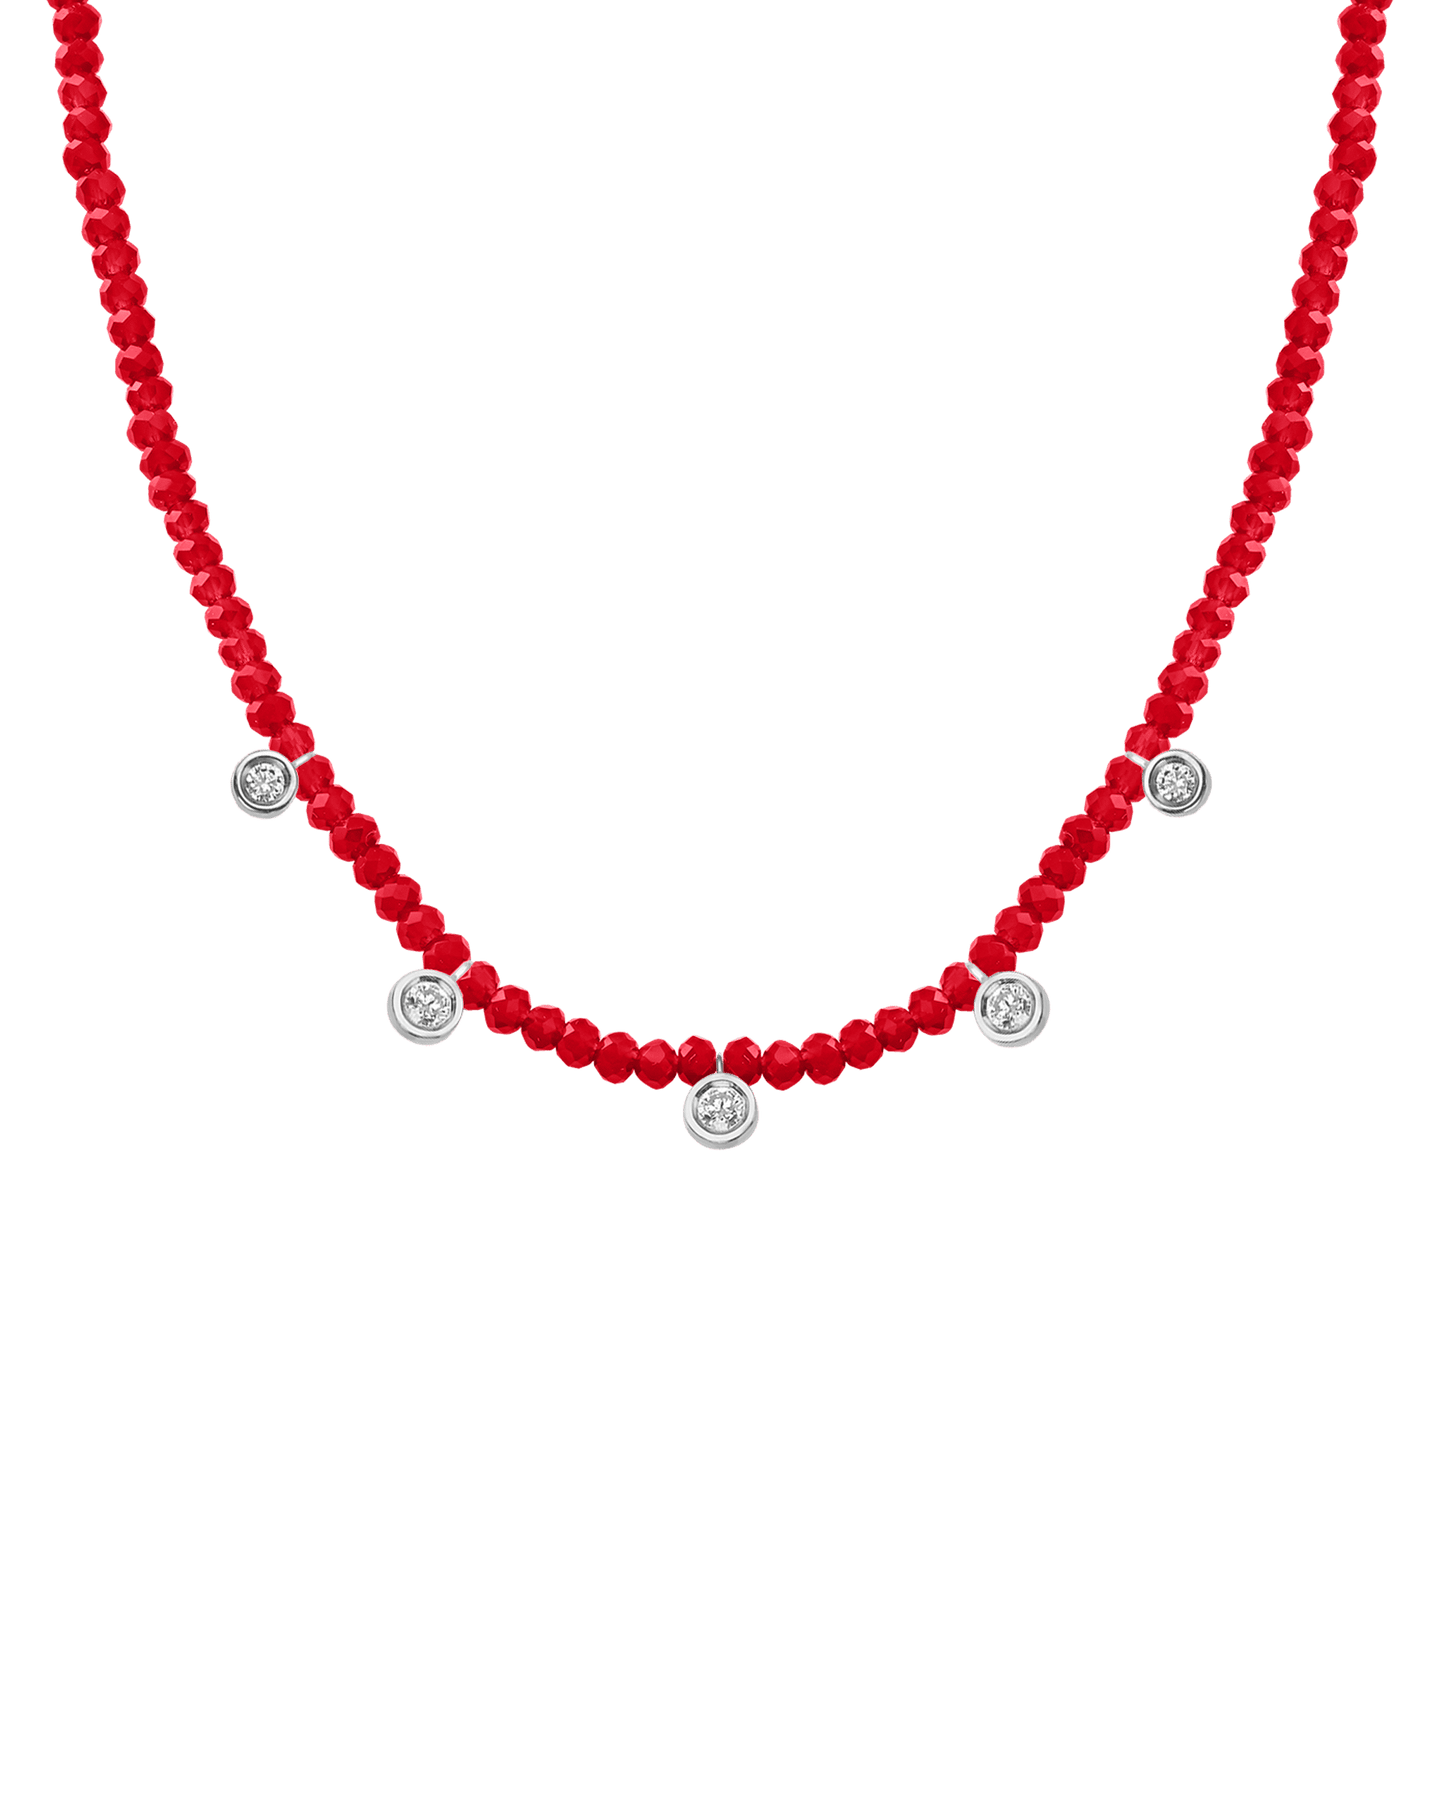 Purple Amethyst Gemstone & Five diamonds Necklace - 14K White Gold Necklaces magal-dev Natural Red Jade 14" - Collar 